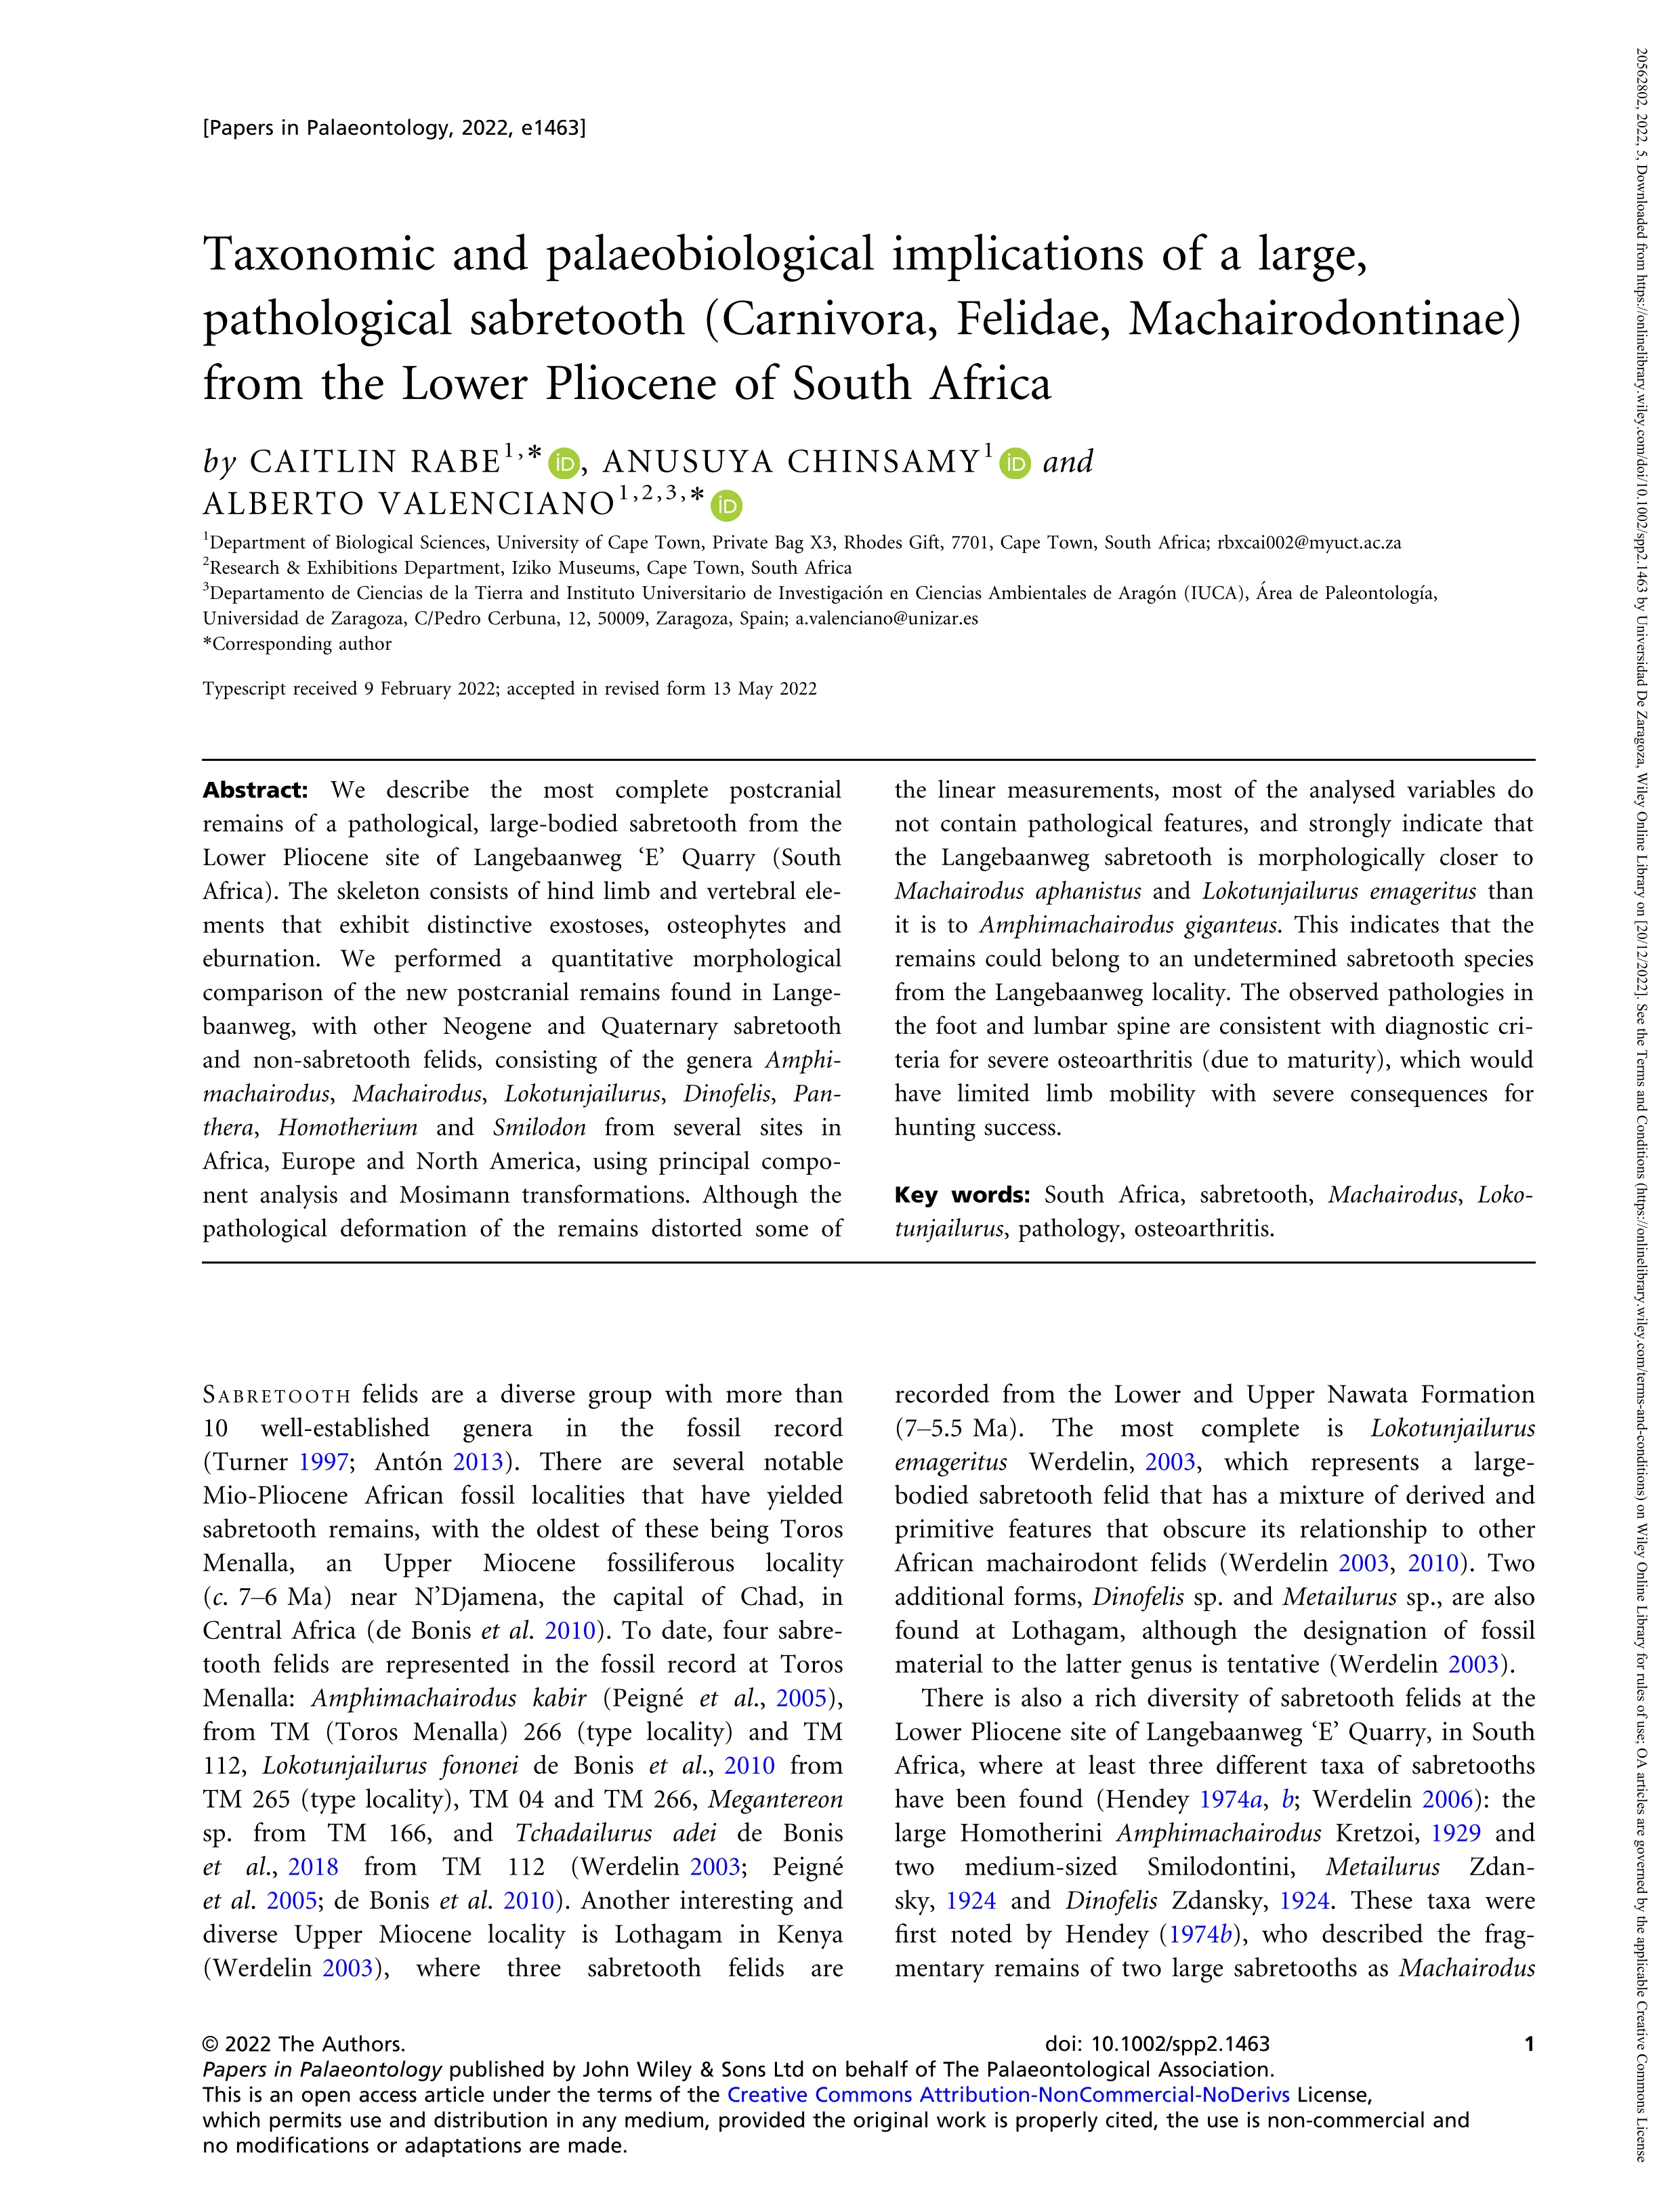 Taxonomic and palaeobiological implications of a large, pathological sabretooth (Carnivora, Felidae, Machairodontinae) from the Lower Pliocene of South Africa